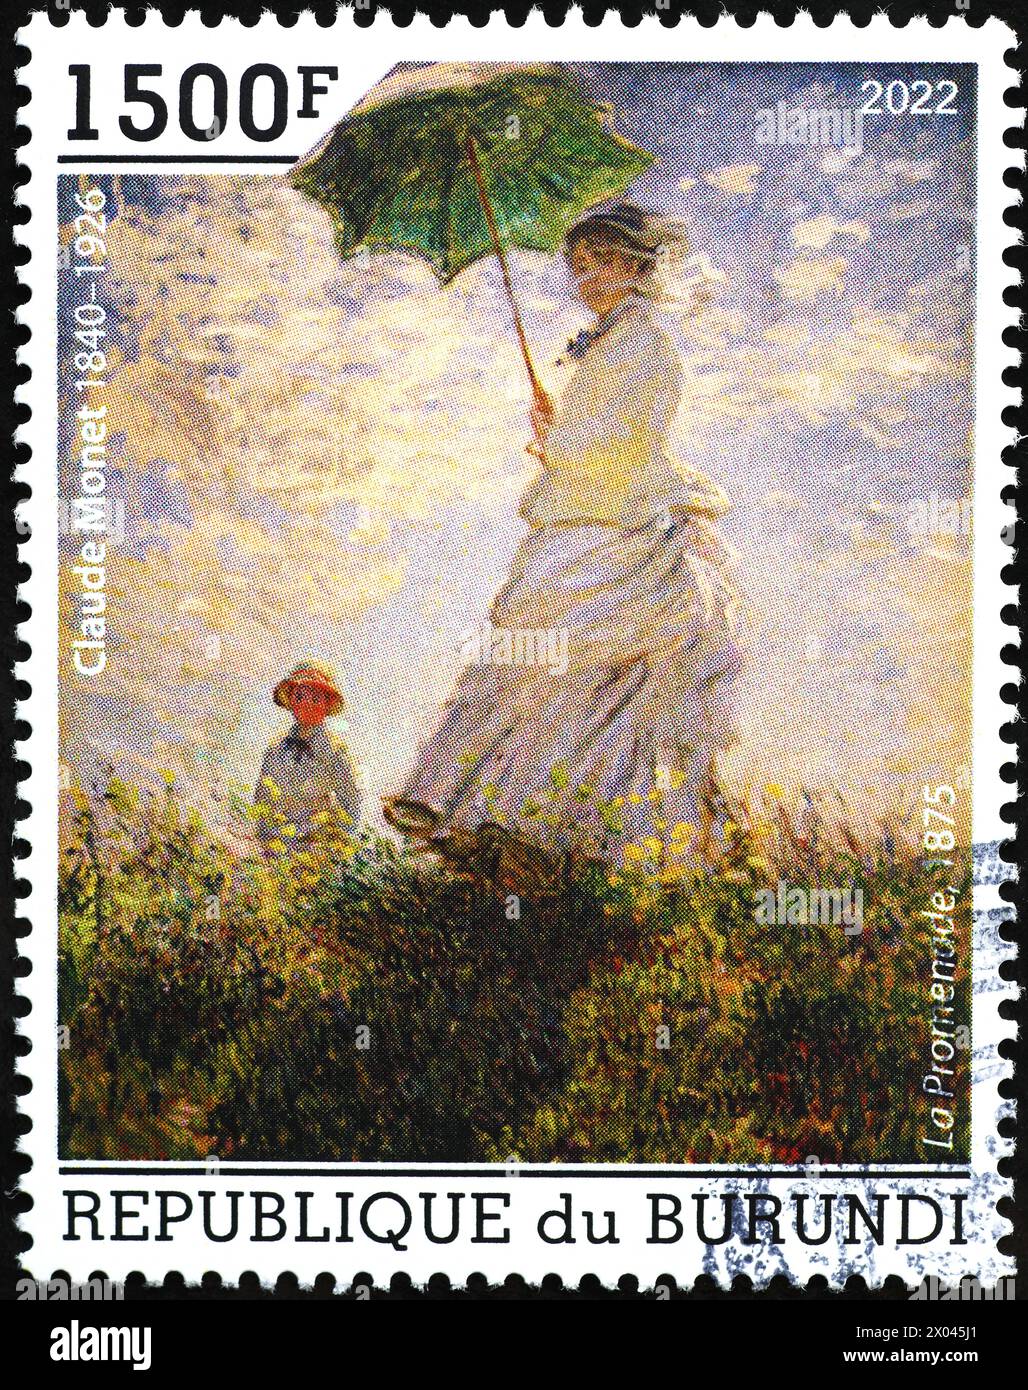 Woman with a Parasol by Monet on postage stamp Stock Photo